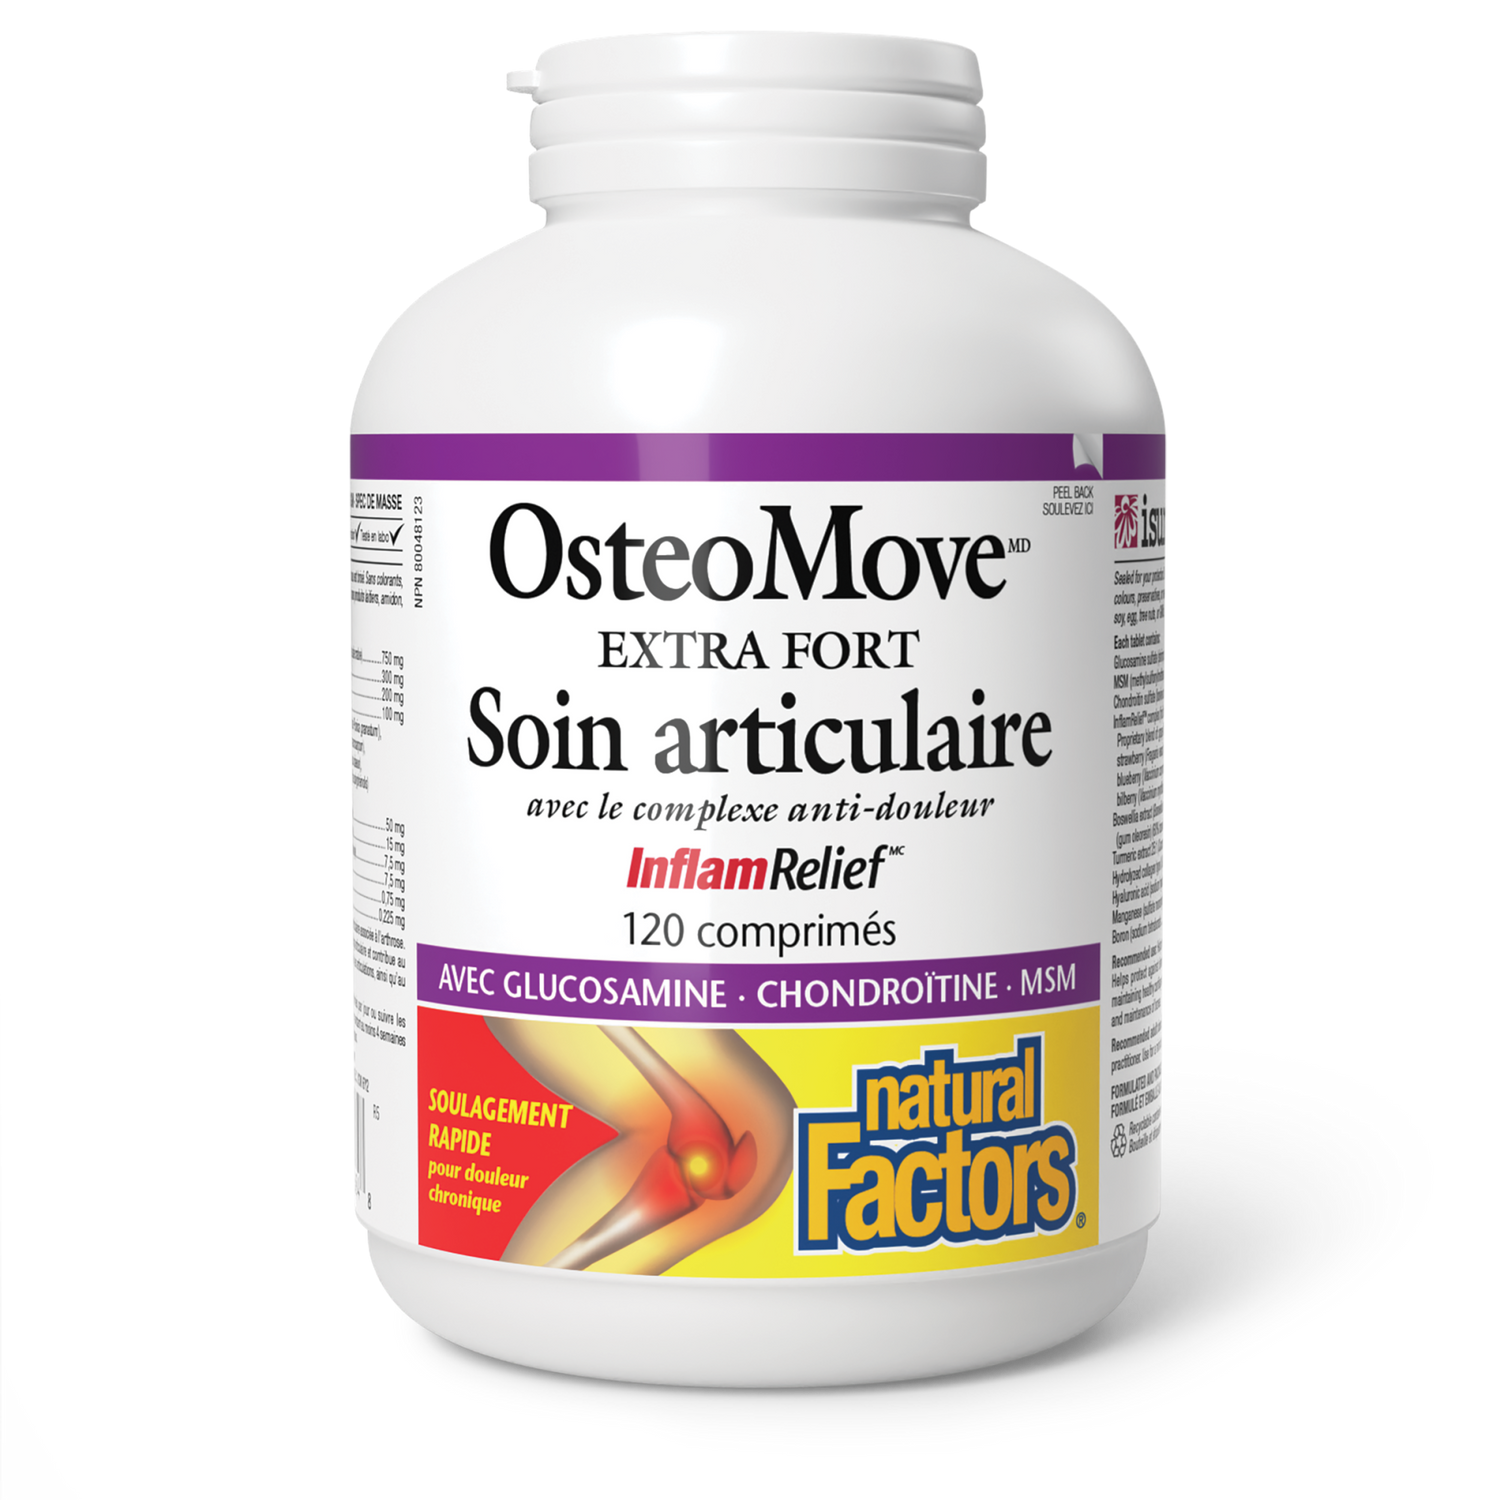 OsteoMove Extra fort Soin articulaire, Natural Factors|v|image|2684